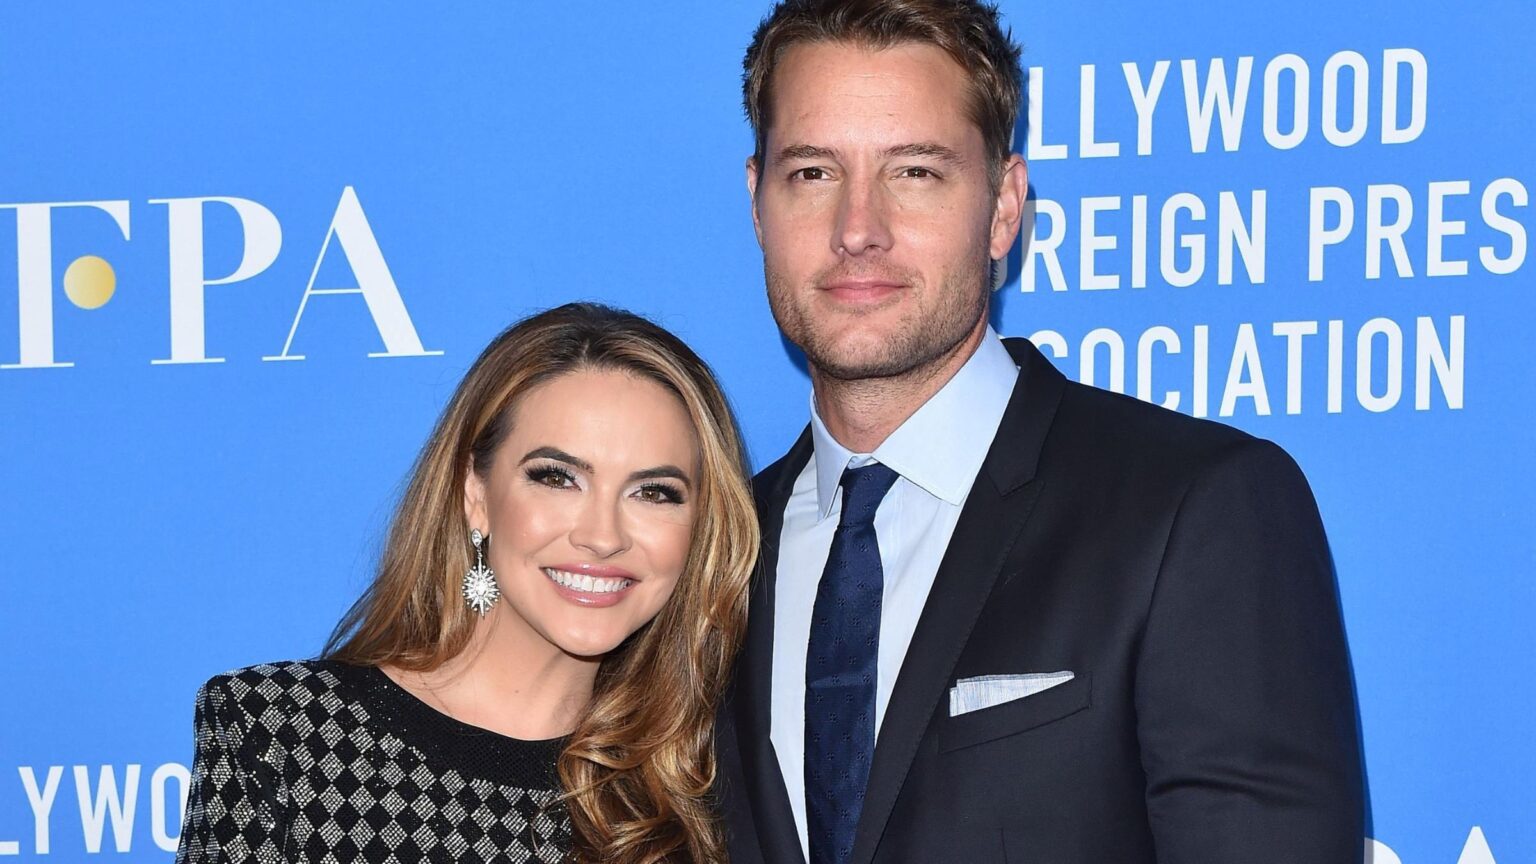 Fans of 'Selling Sunset' and 'This is Us' knew all about the marriage between Chrishell Stause and Justin Hartley. Here's a look at their divorce.